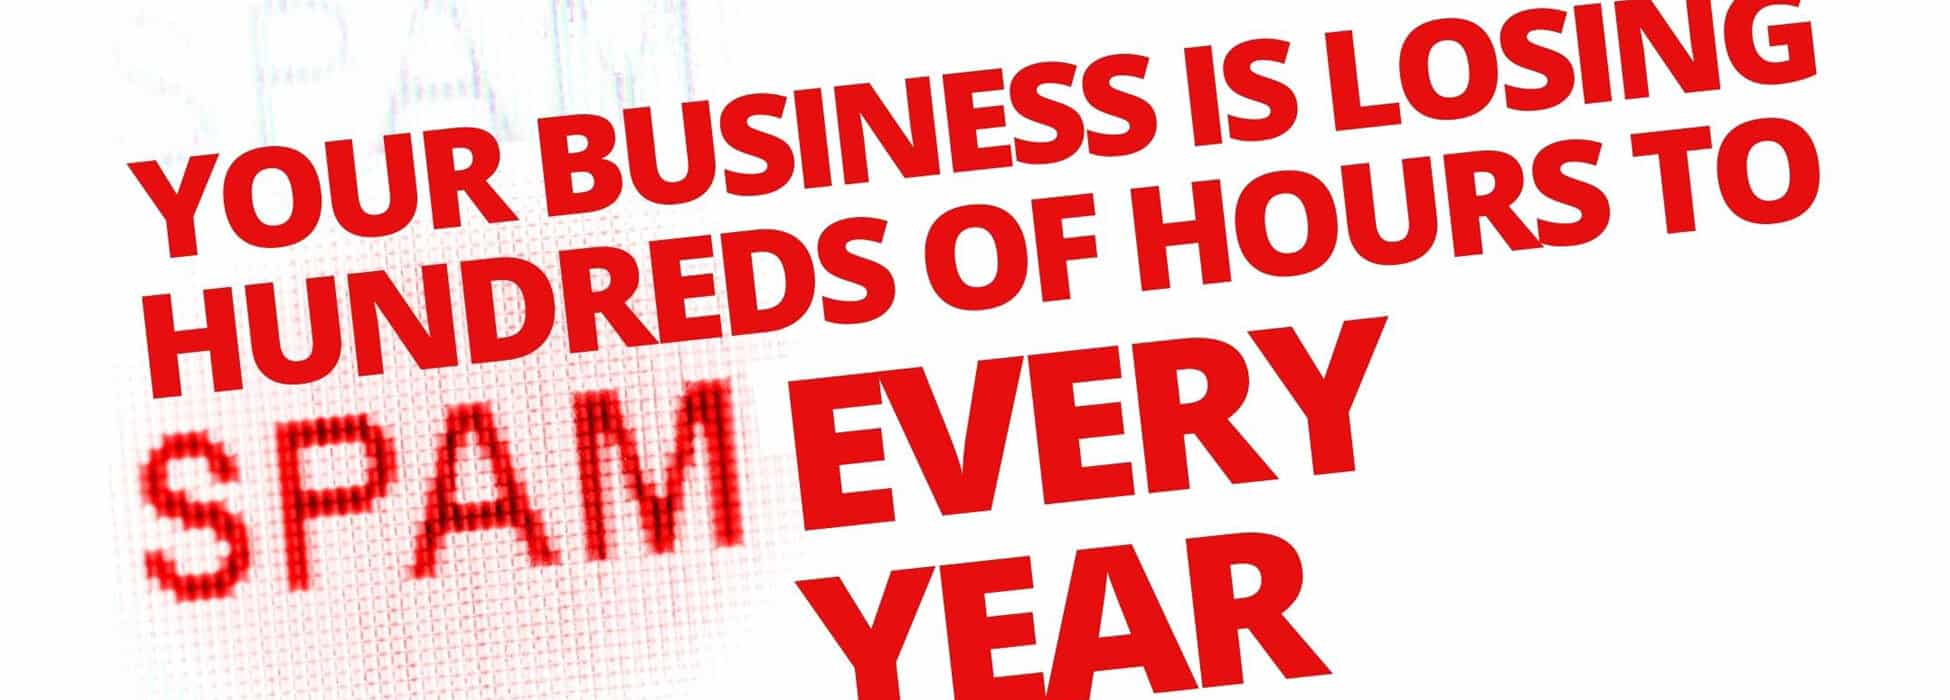 Your business is losing hundreds of hours to spam every year